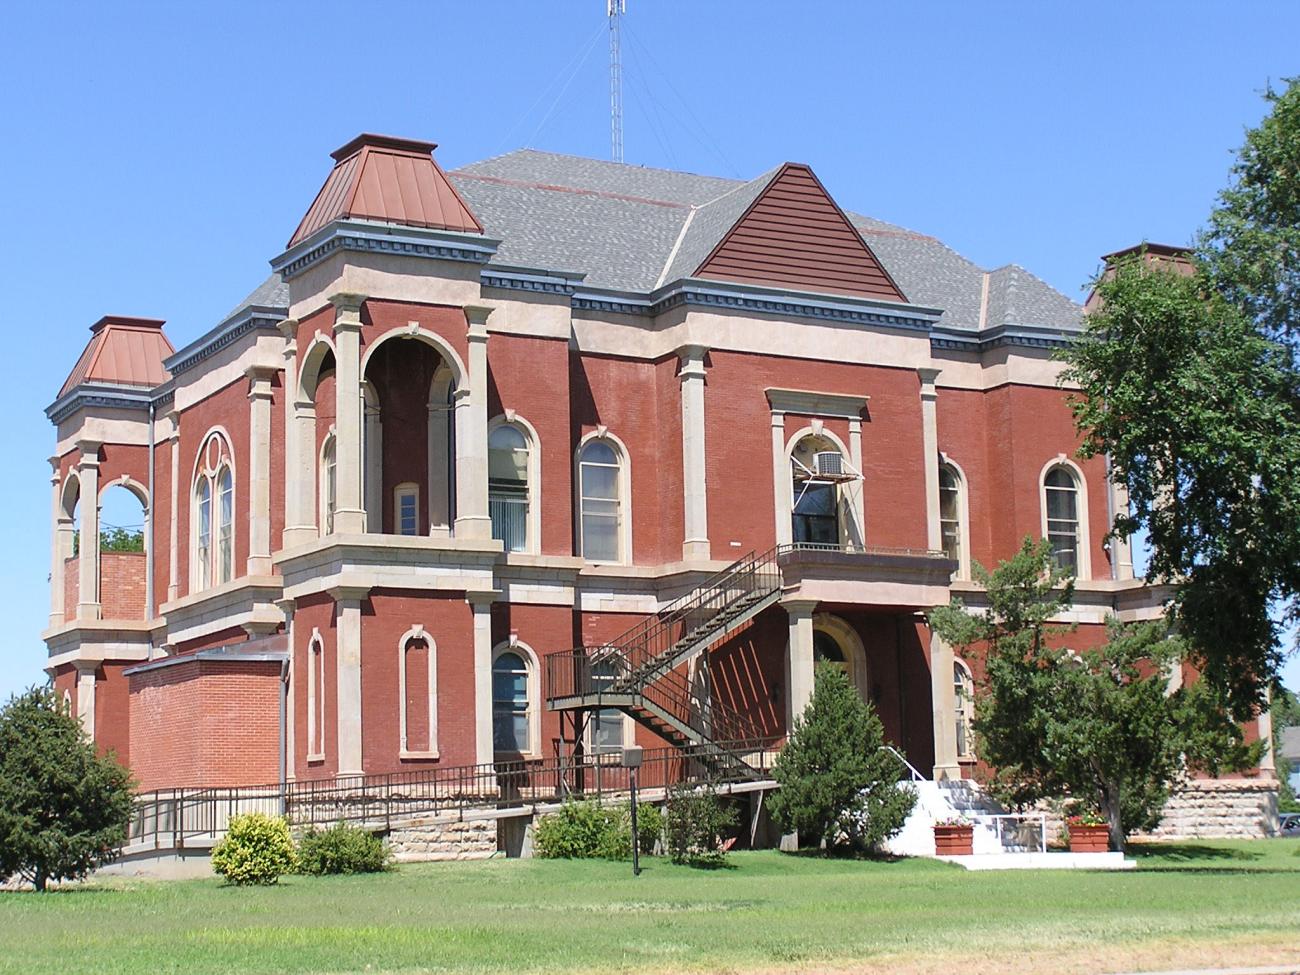 A photo of the Bent County Courthouse and Jail in Las Animas, a two story red brick building.